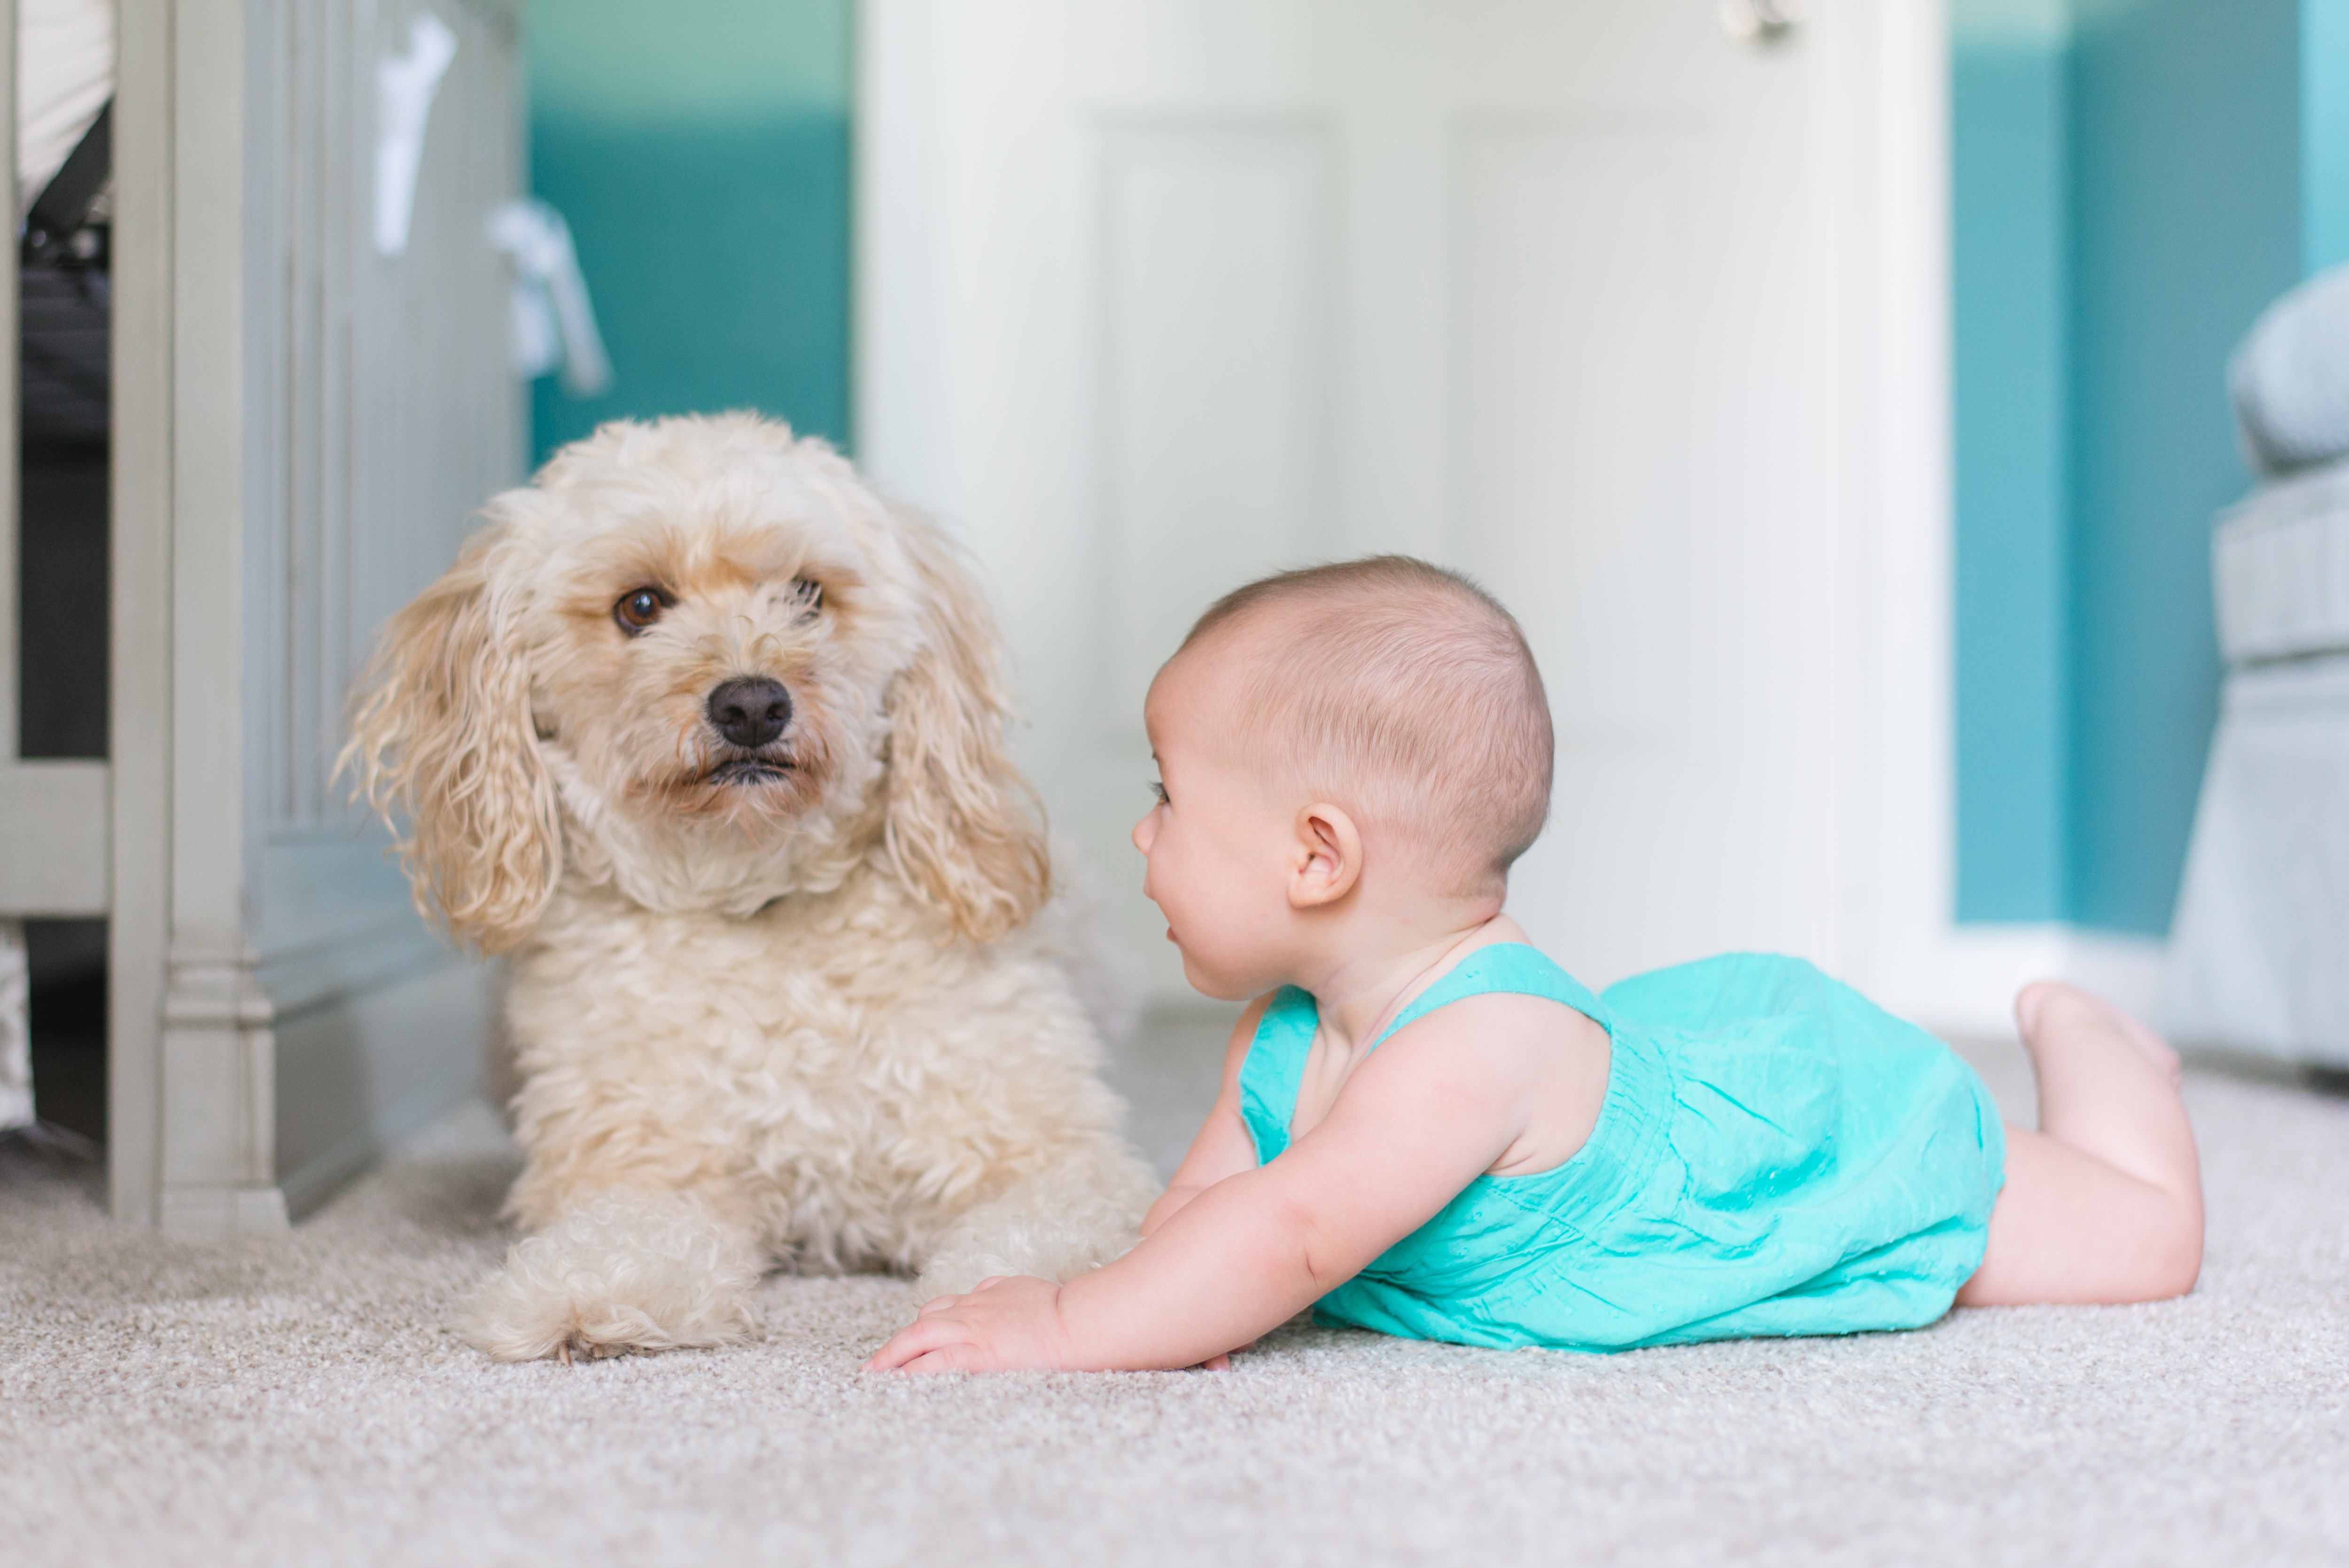 Pets can make carpets dirty, faster. Dirty carpets influence the health of your little ones. For this reason you need a more regular cleaning!